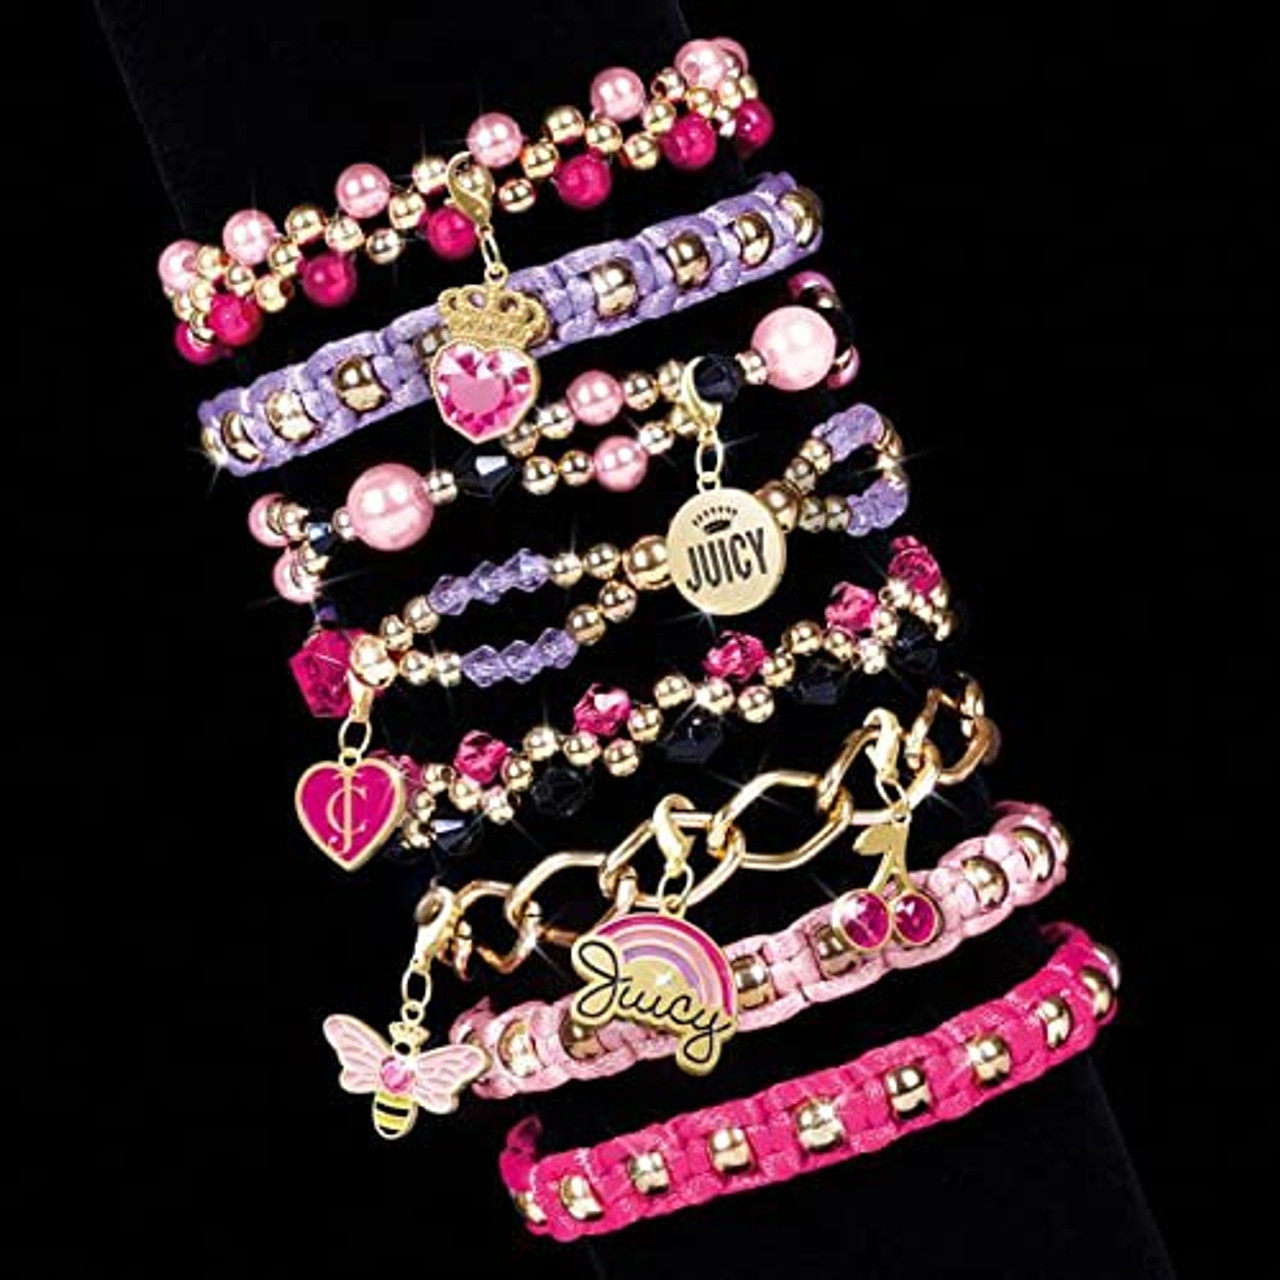  Make It Real - Juicy Couture Perfectly Pink Bracelet